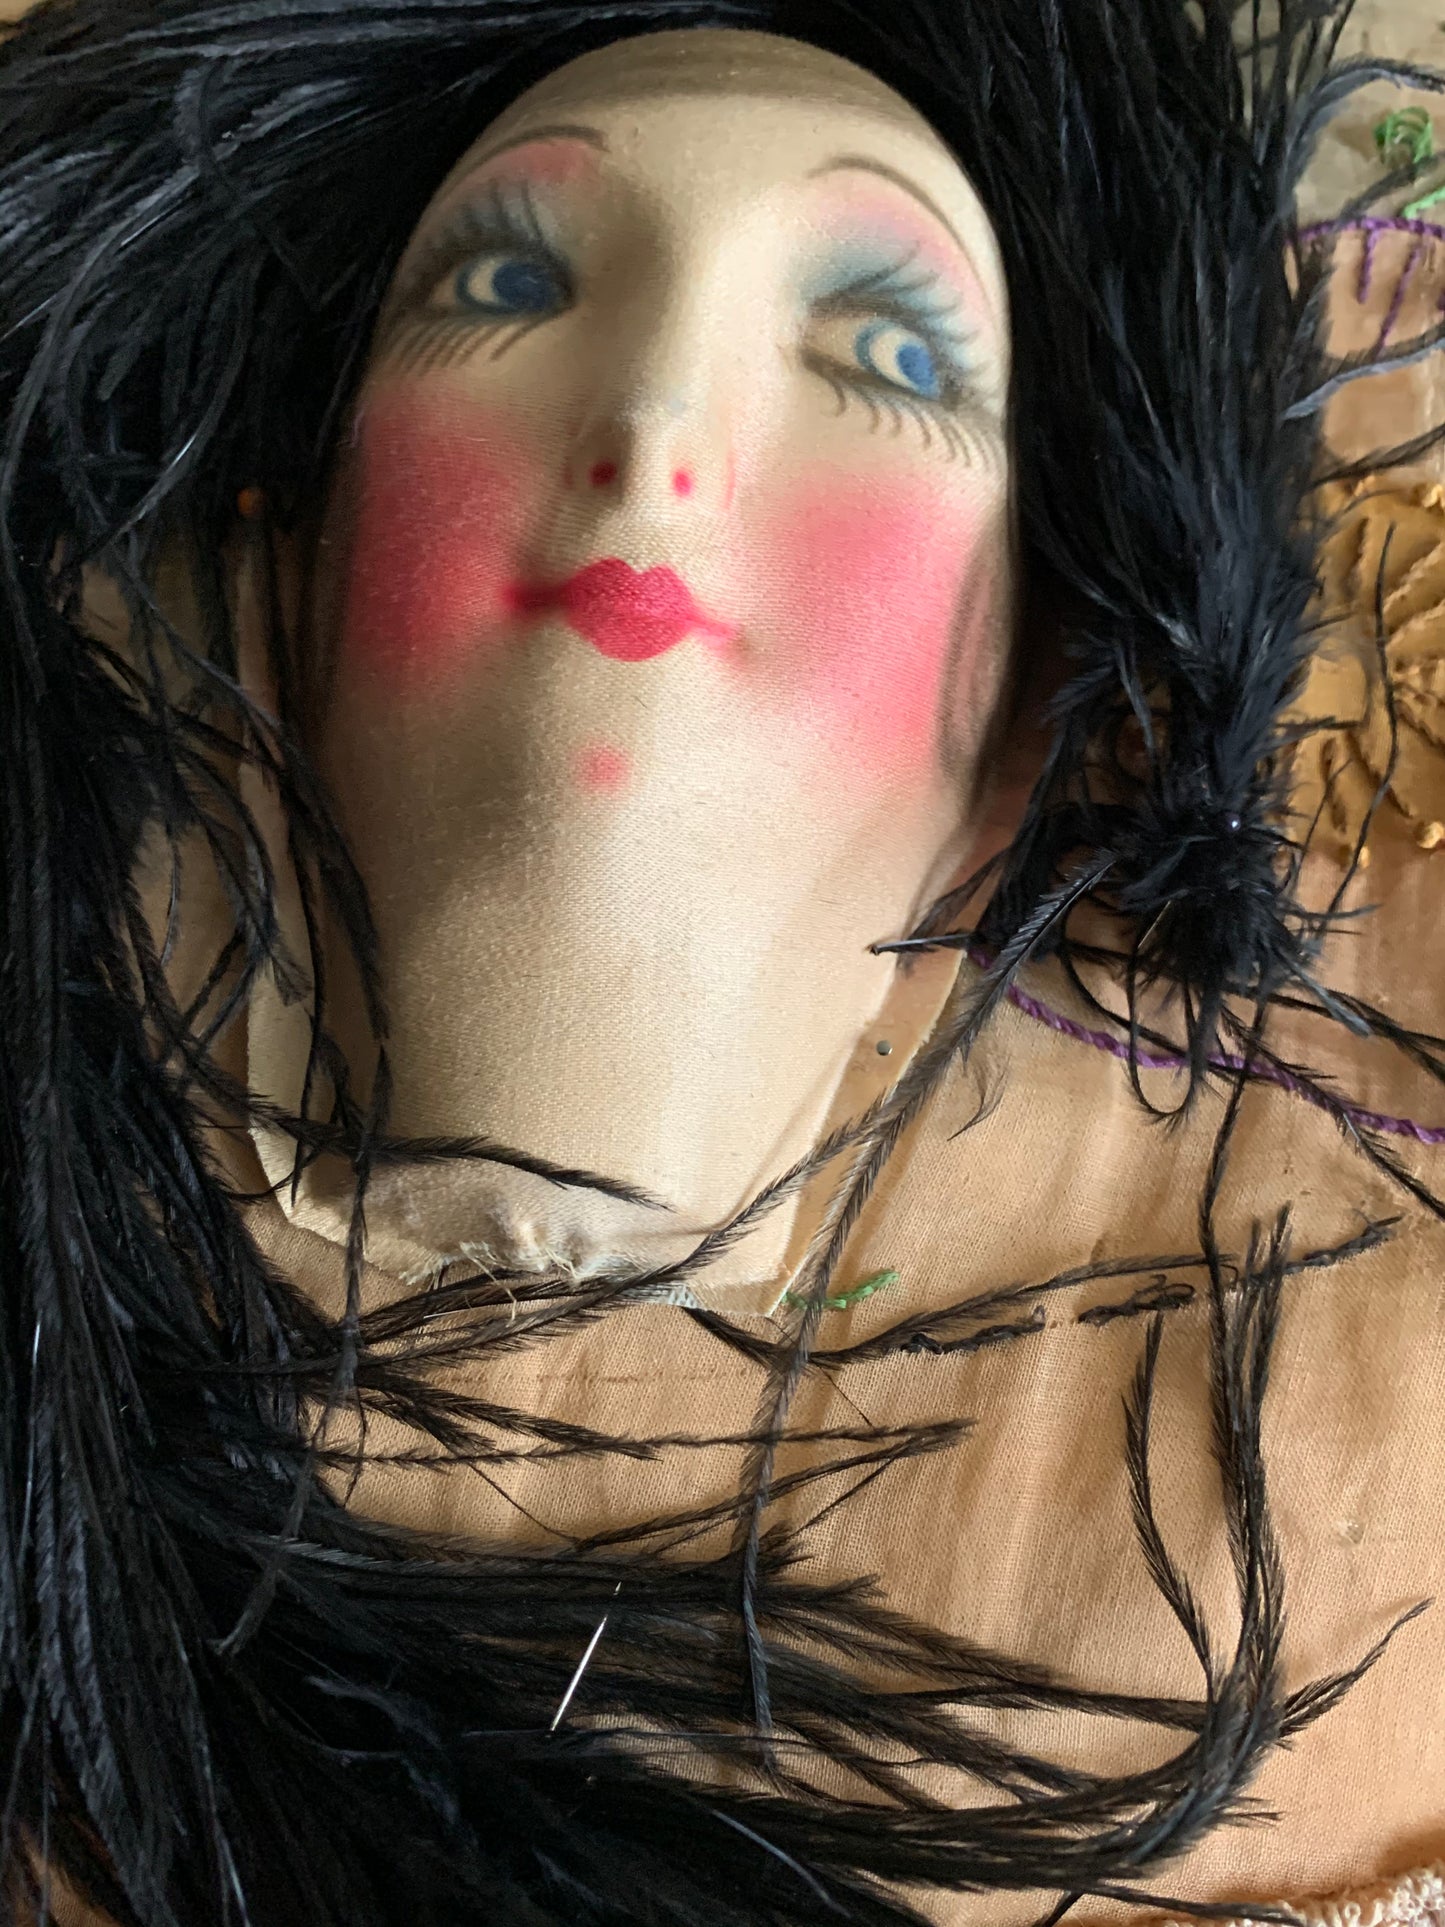 Assembled shabby vintage doll face pillow